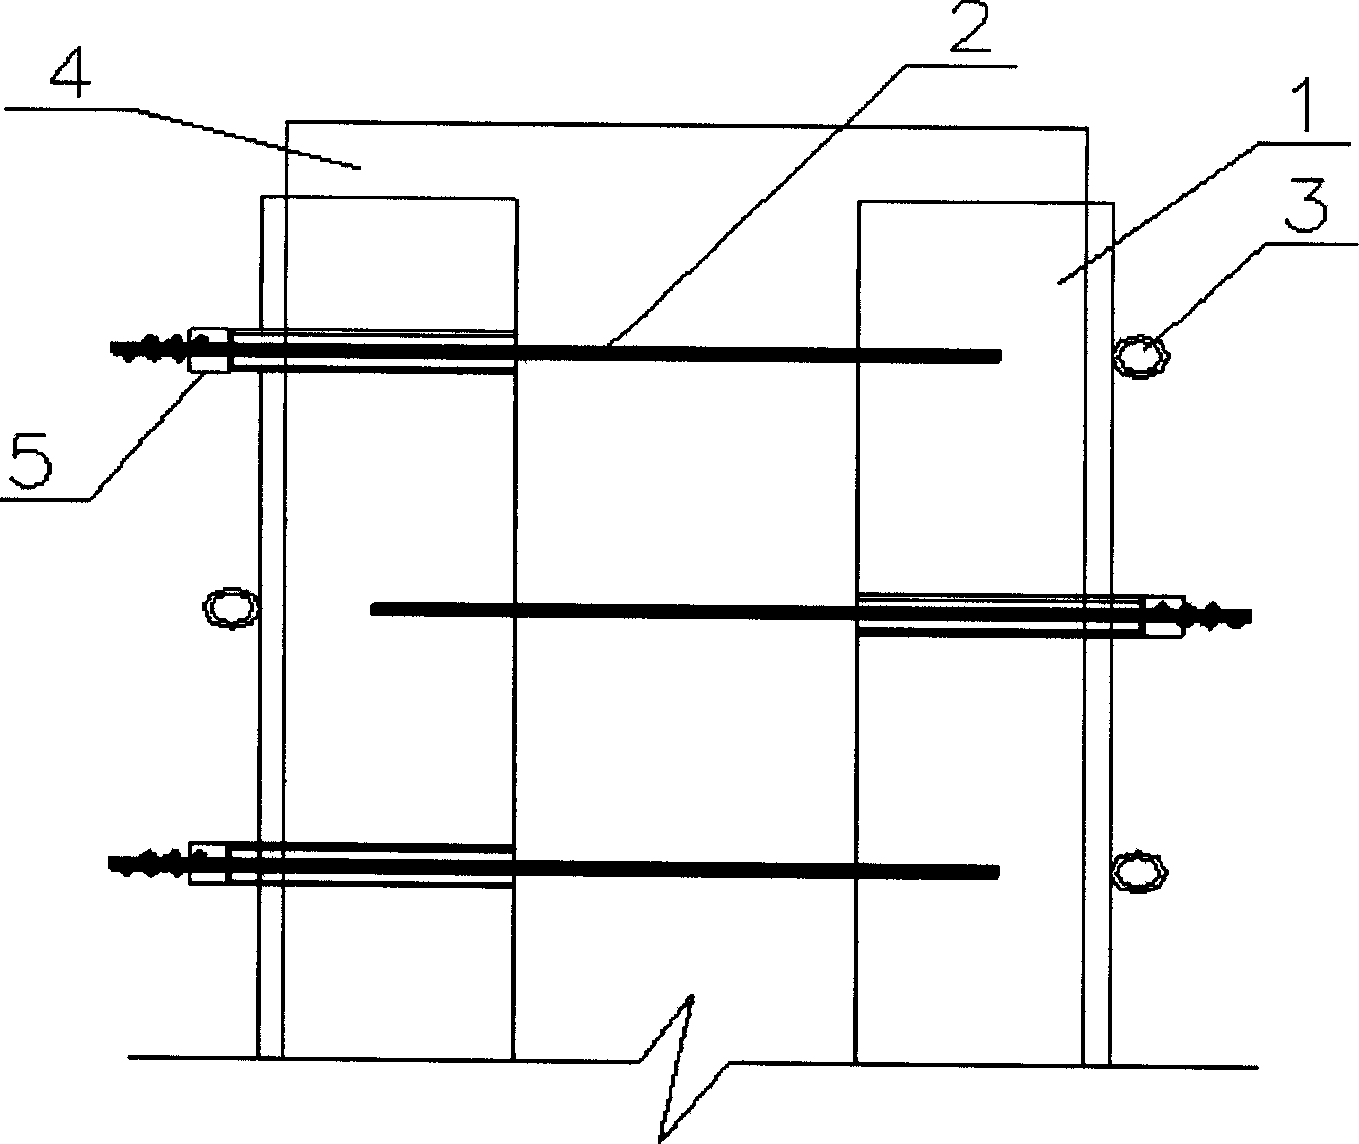 Method and structure for reinforcing concrete post using angle steel